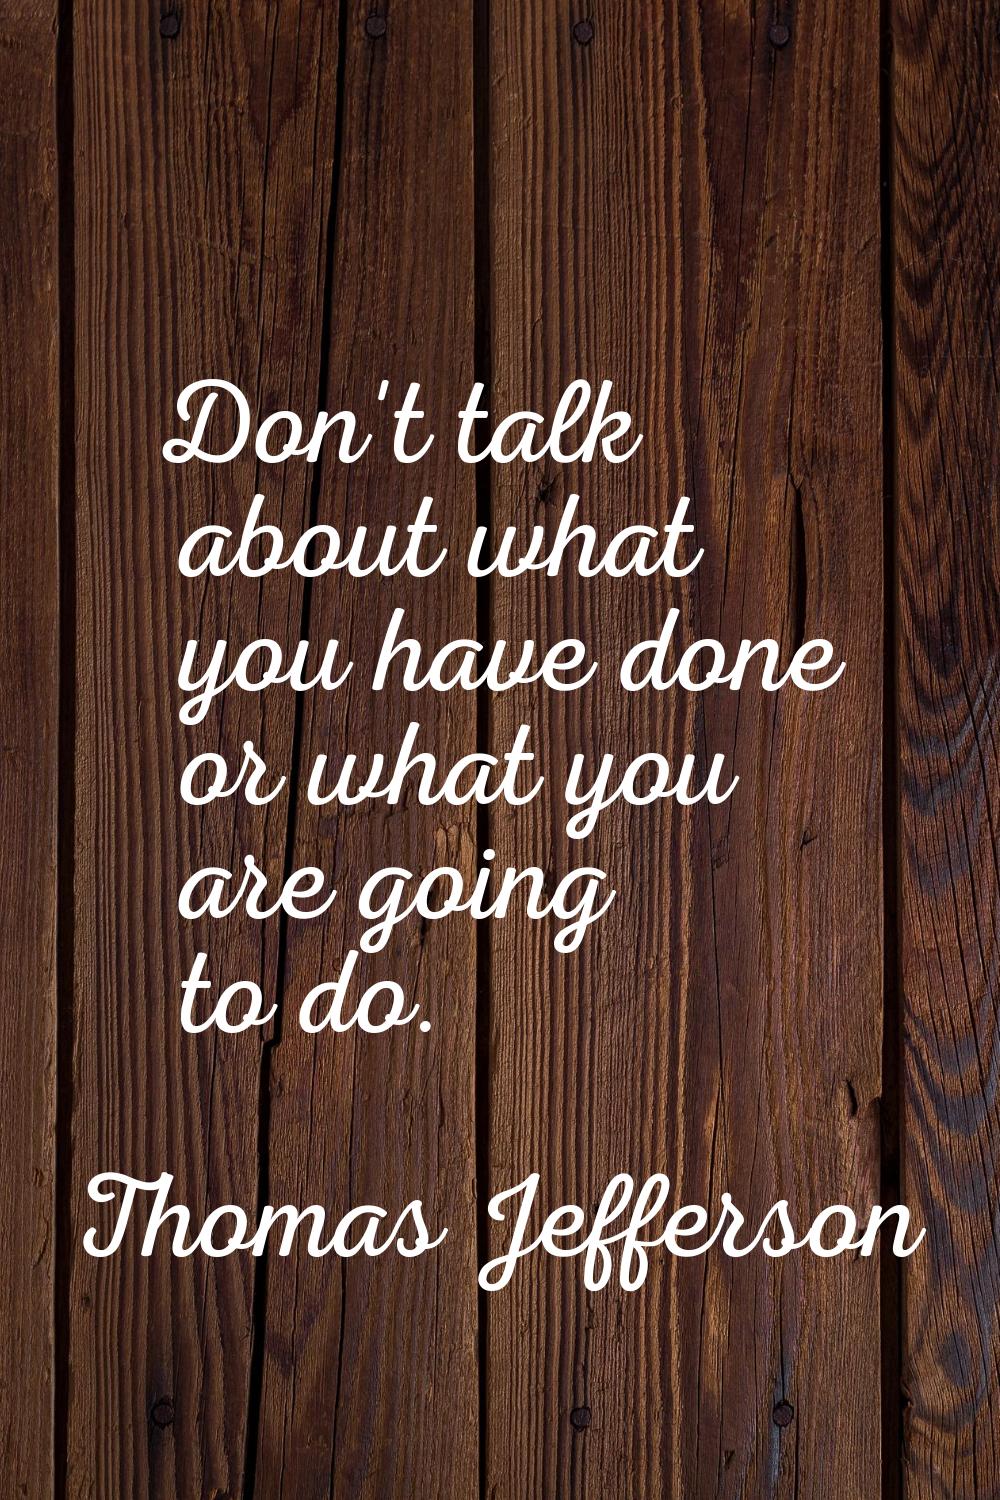 Don't talk about what you have done or what you are going to do.